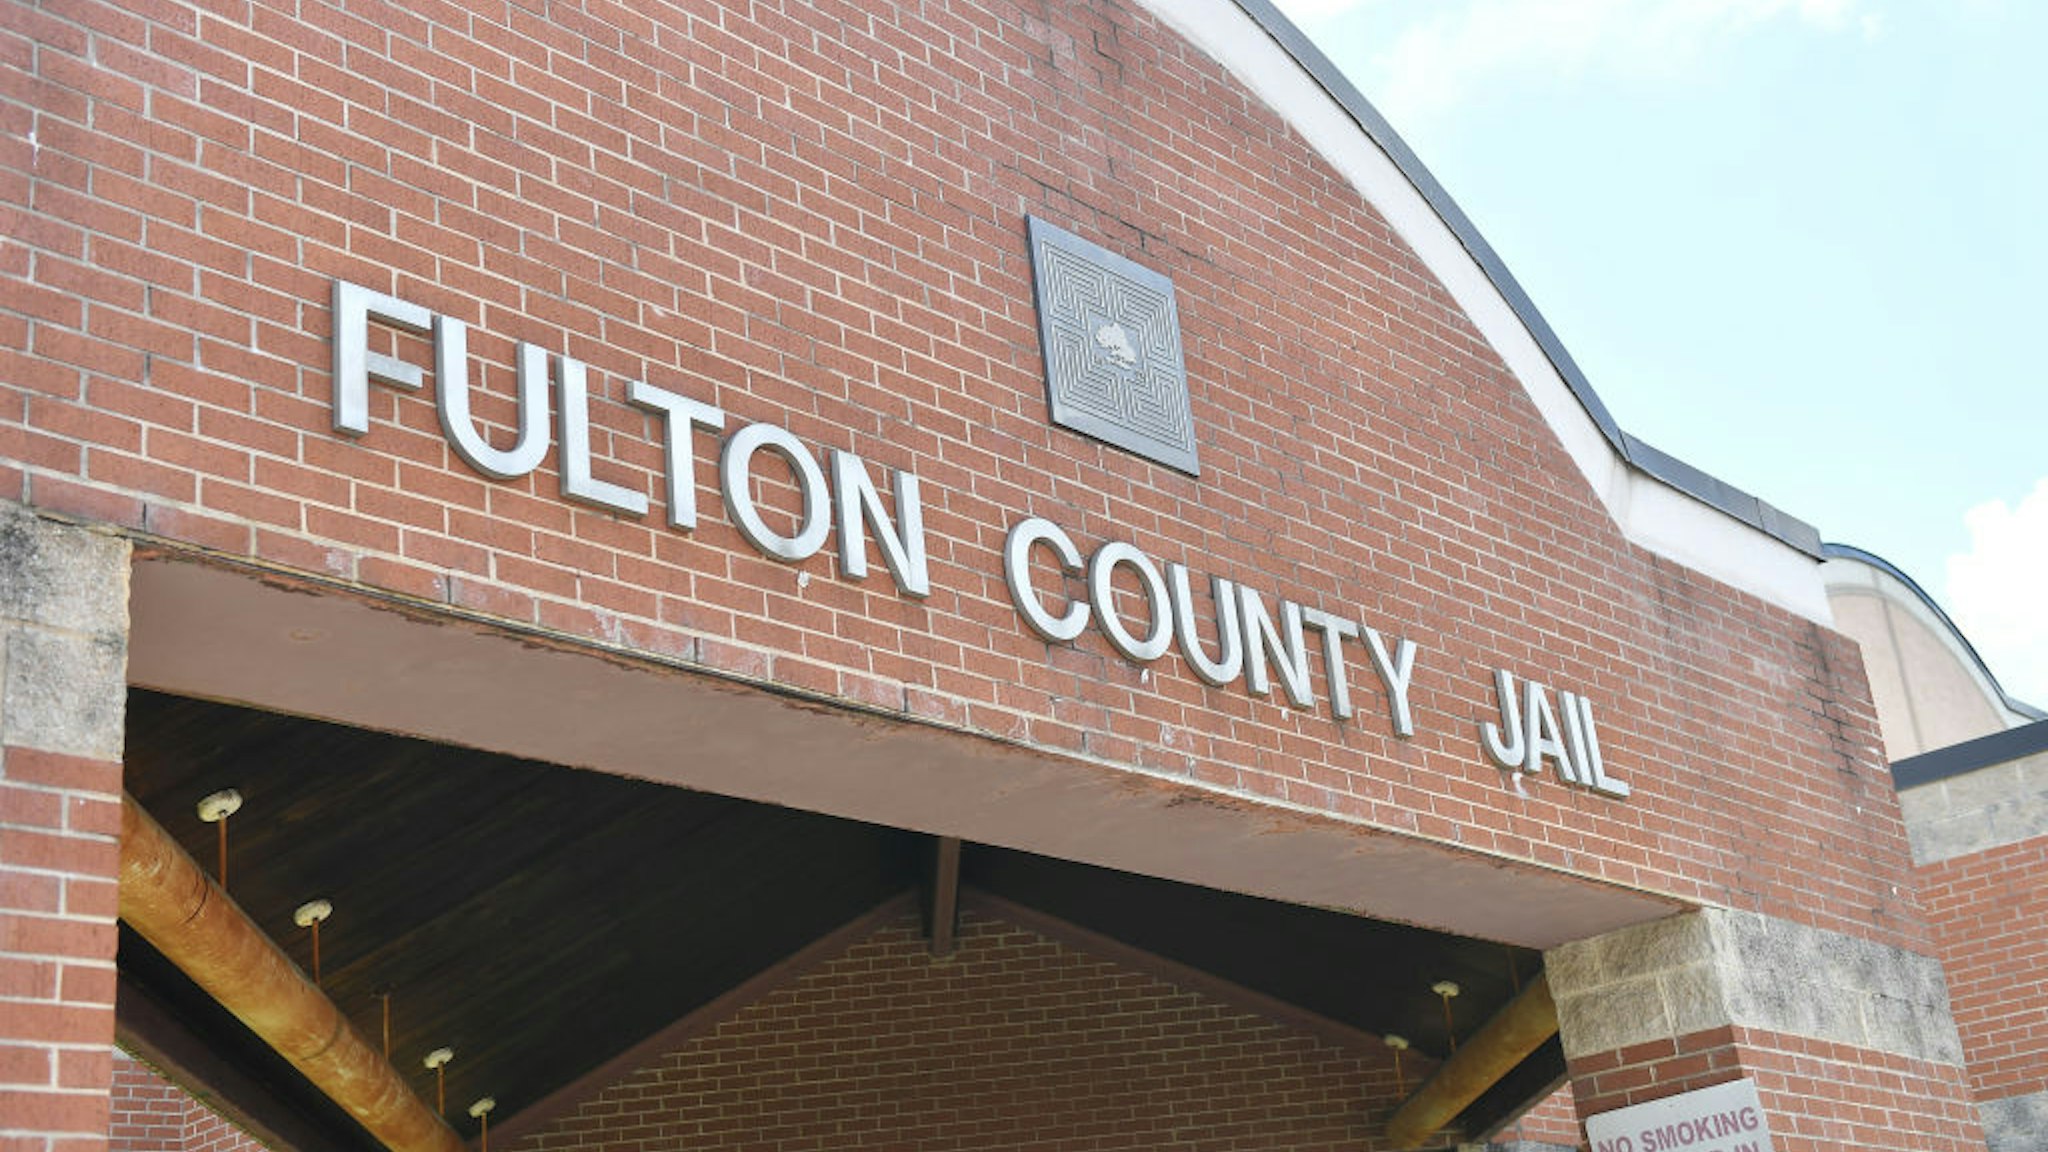 A general view of Fulton County Jail building during "Masks For The People" Initiative at Fulton County Jail on July 10, 2020 in Atlanta, Georgia.